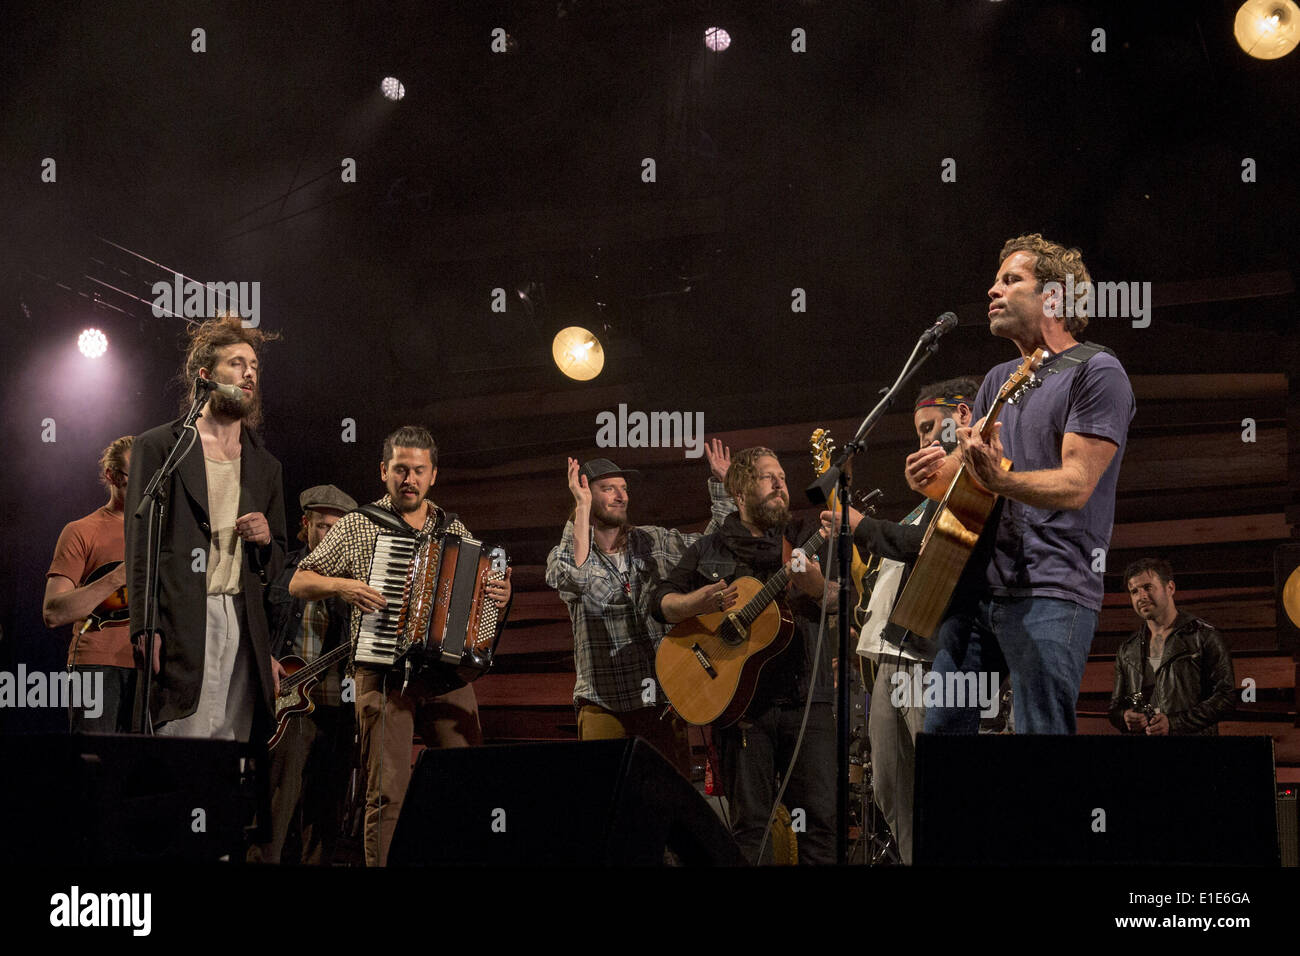 Chicago, Illinois, USA. 31st May, 2014. Members of Edward Sharpe and the Magnetic Zeros perform live with JACK JOHNSON at the FirstMerit Bank Pavilion at Northerly Island in Chicago, Illinois © Daniel DeSlover/ZUMAPRESS.com/Alamy Live News Stock Photo